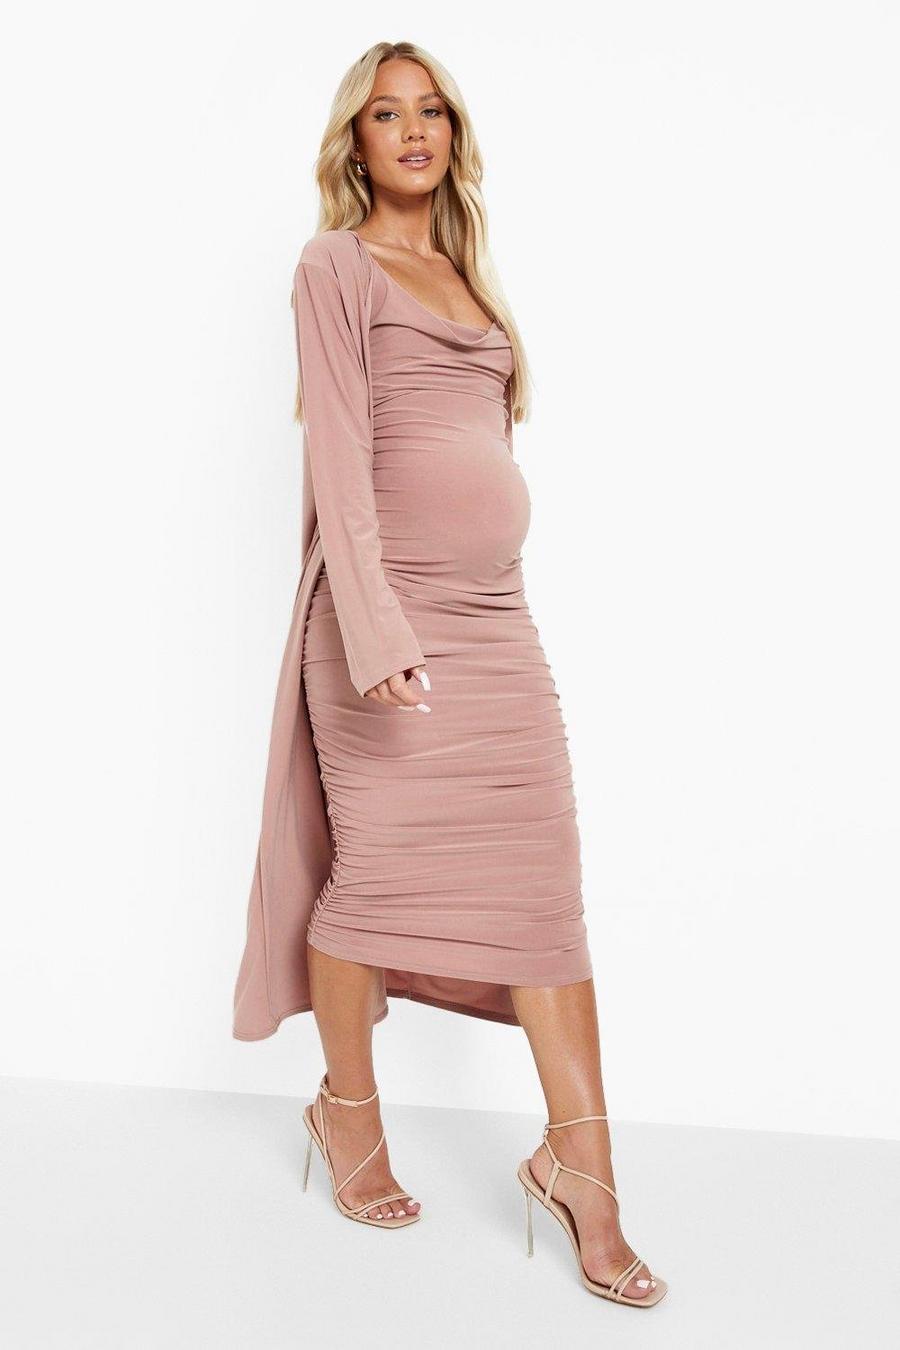 Rose pink Maternity Strappy Cowl Neck Dress And Duster Coat